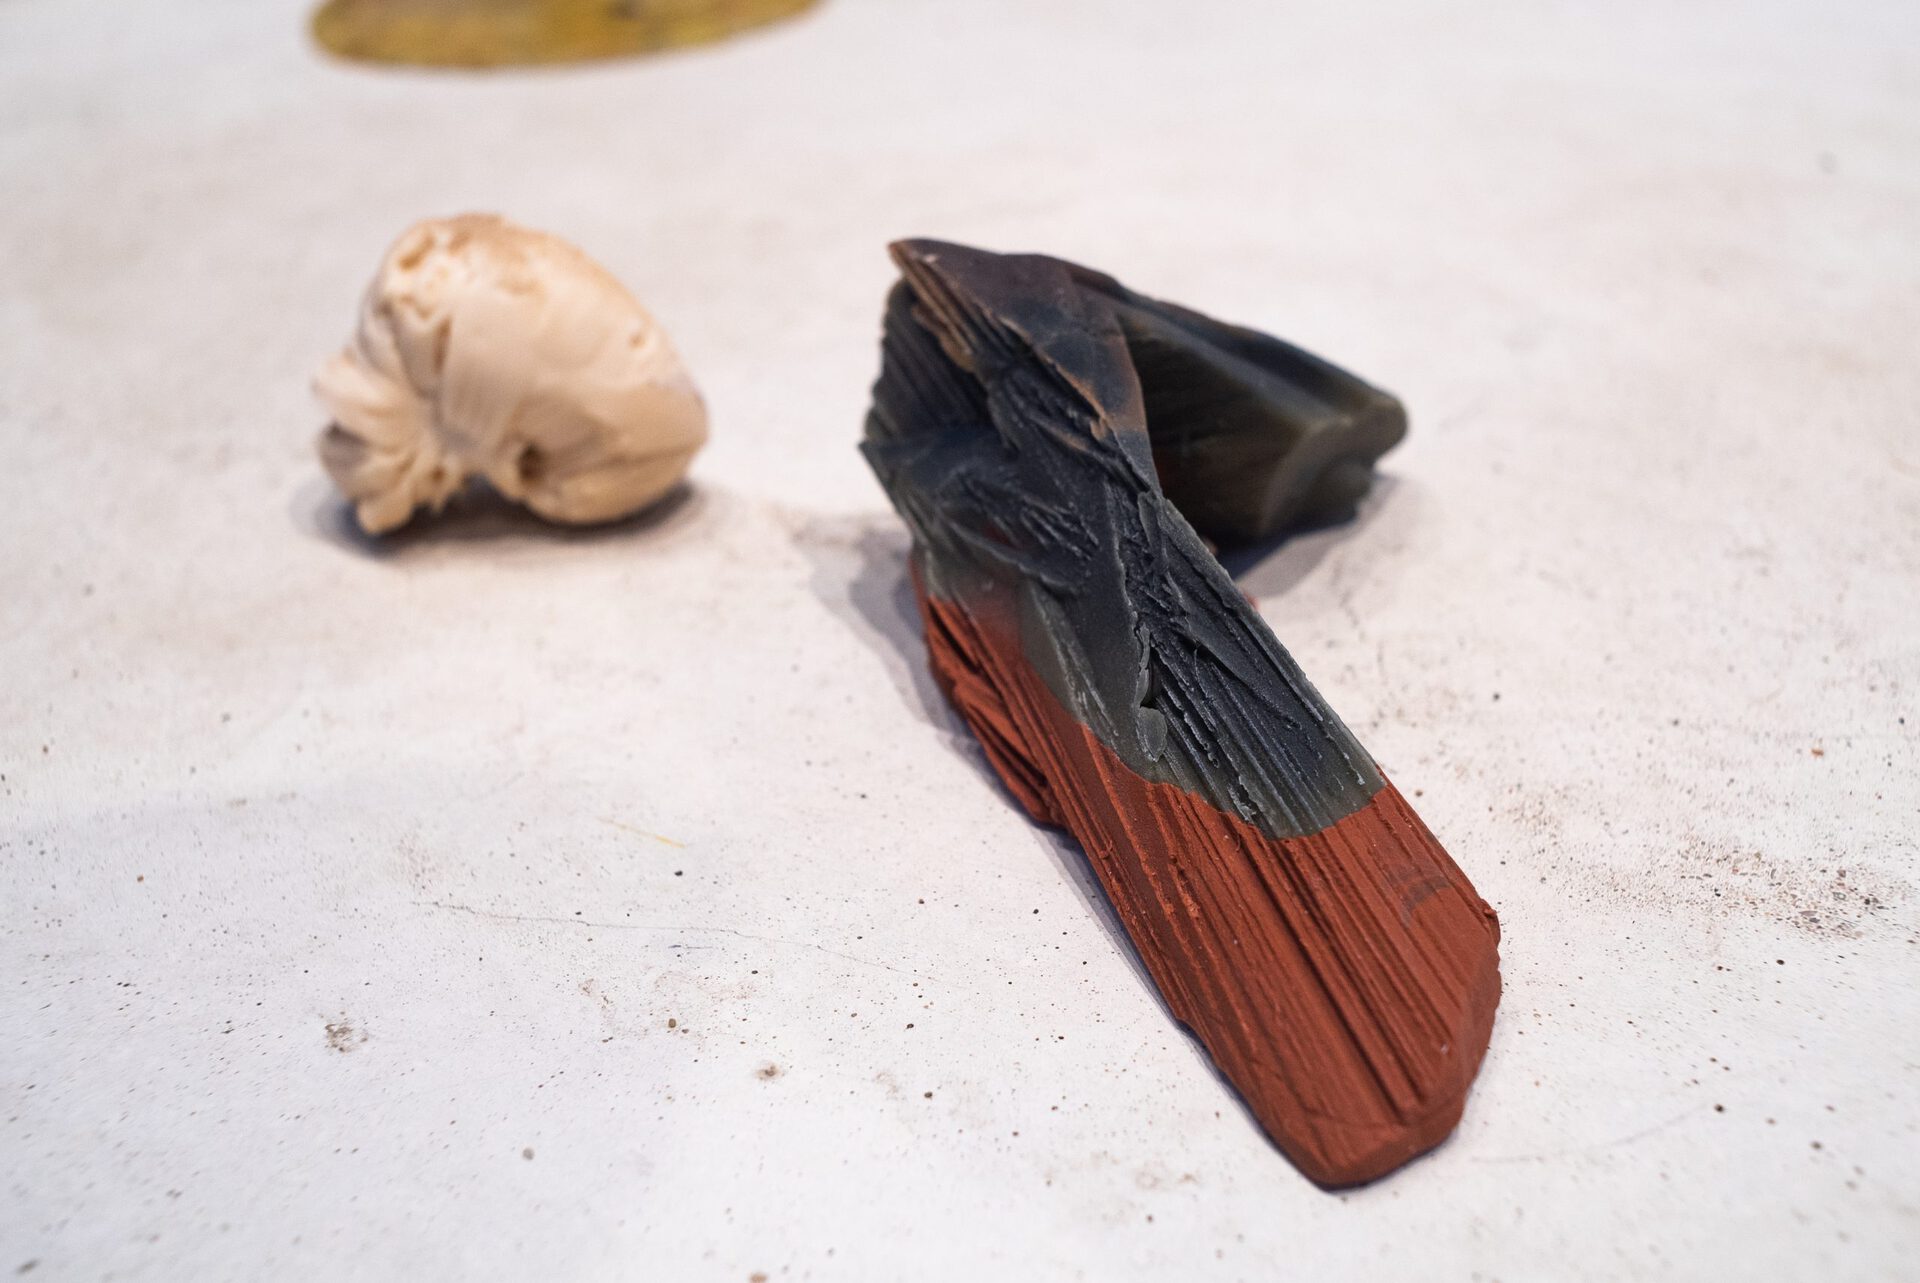 Ittah Yoda, No History of Its Own, 2021,  Mixed media, Soap, Beeswax, natural pigment, steel Rupert at apiece, Vilnius.  Photo by Laurynas Skeisgiela. Courtesy of the artist.